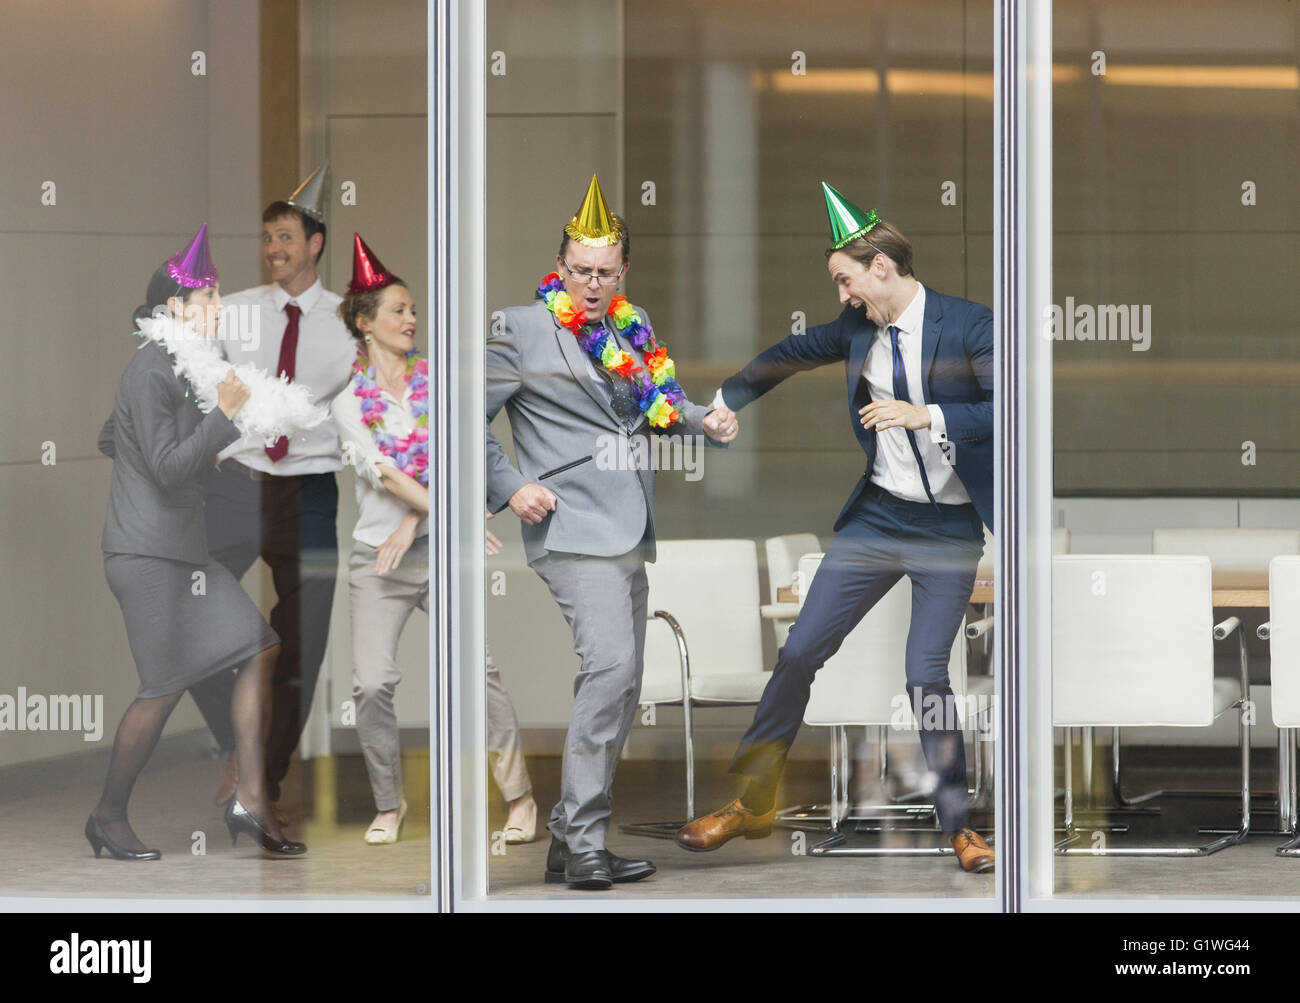 Playful business people in party hats dancing at conference room window Stock Photo